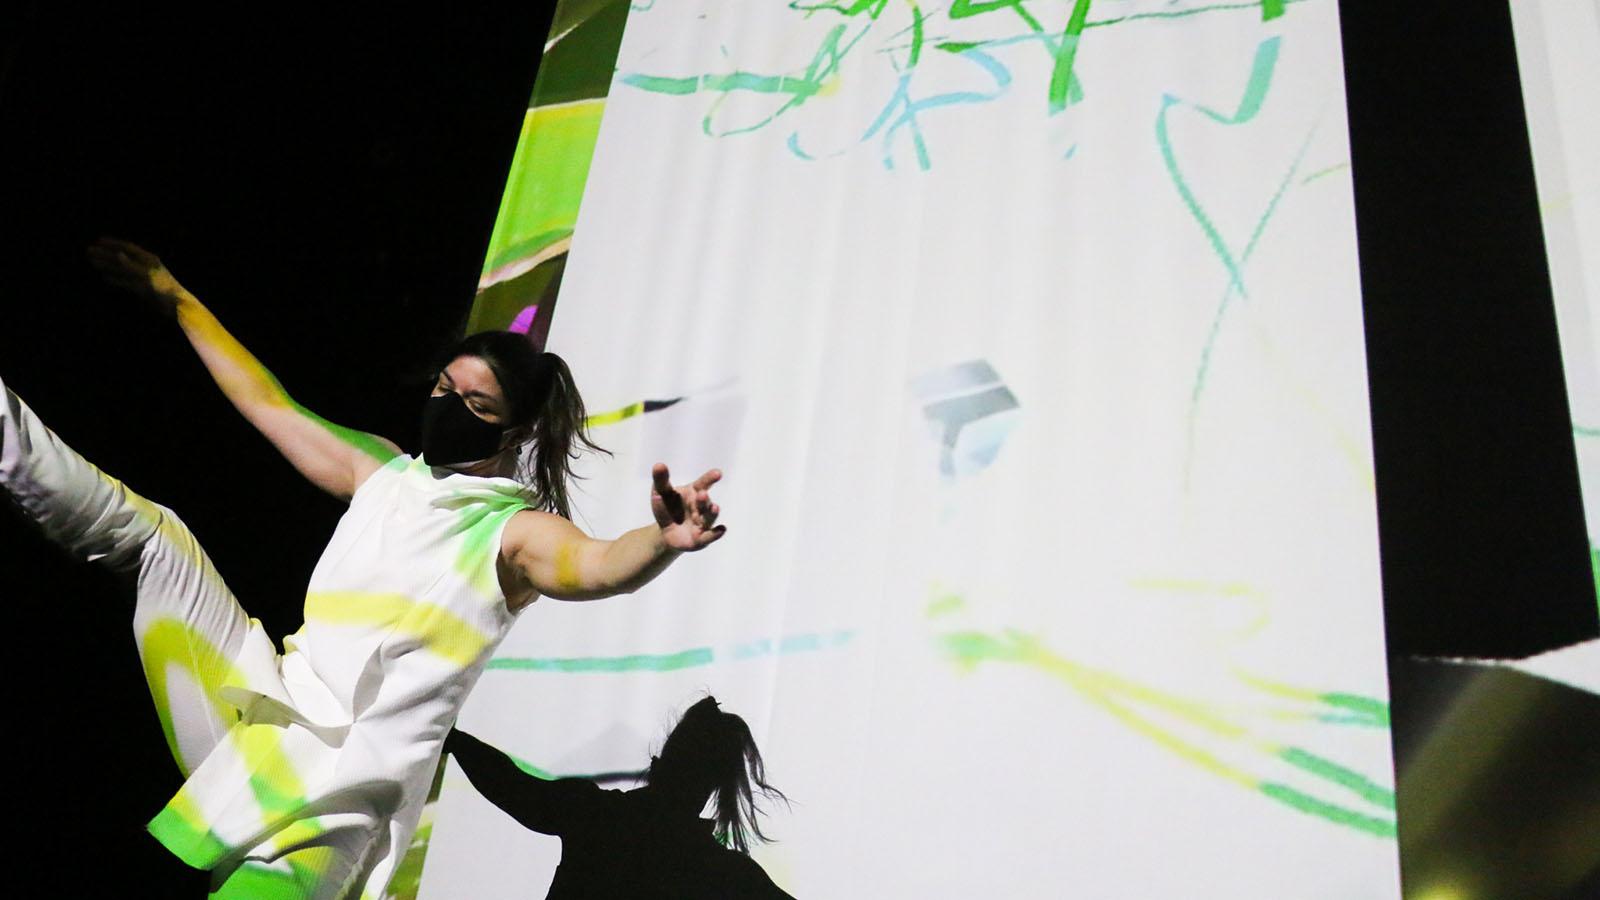 A dancer dressed white extends her arms in front of a white and green projection